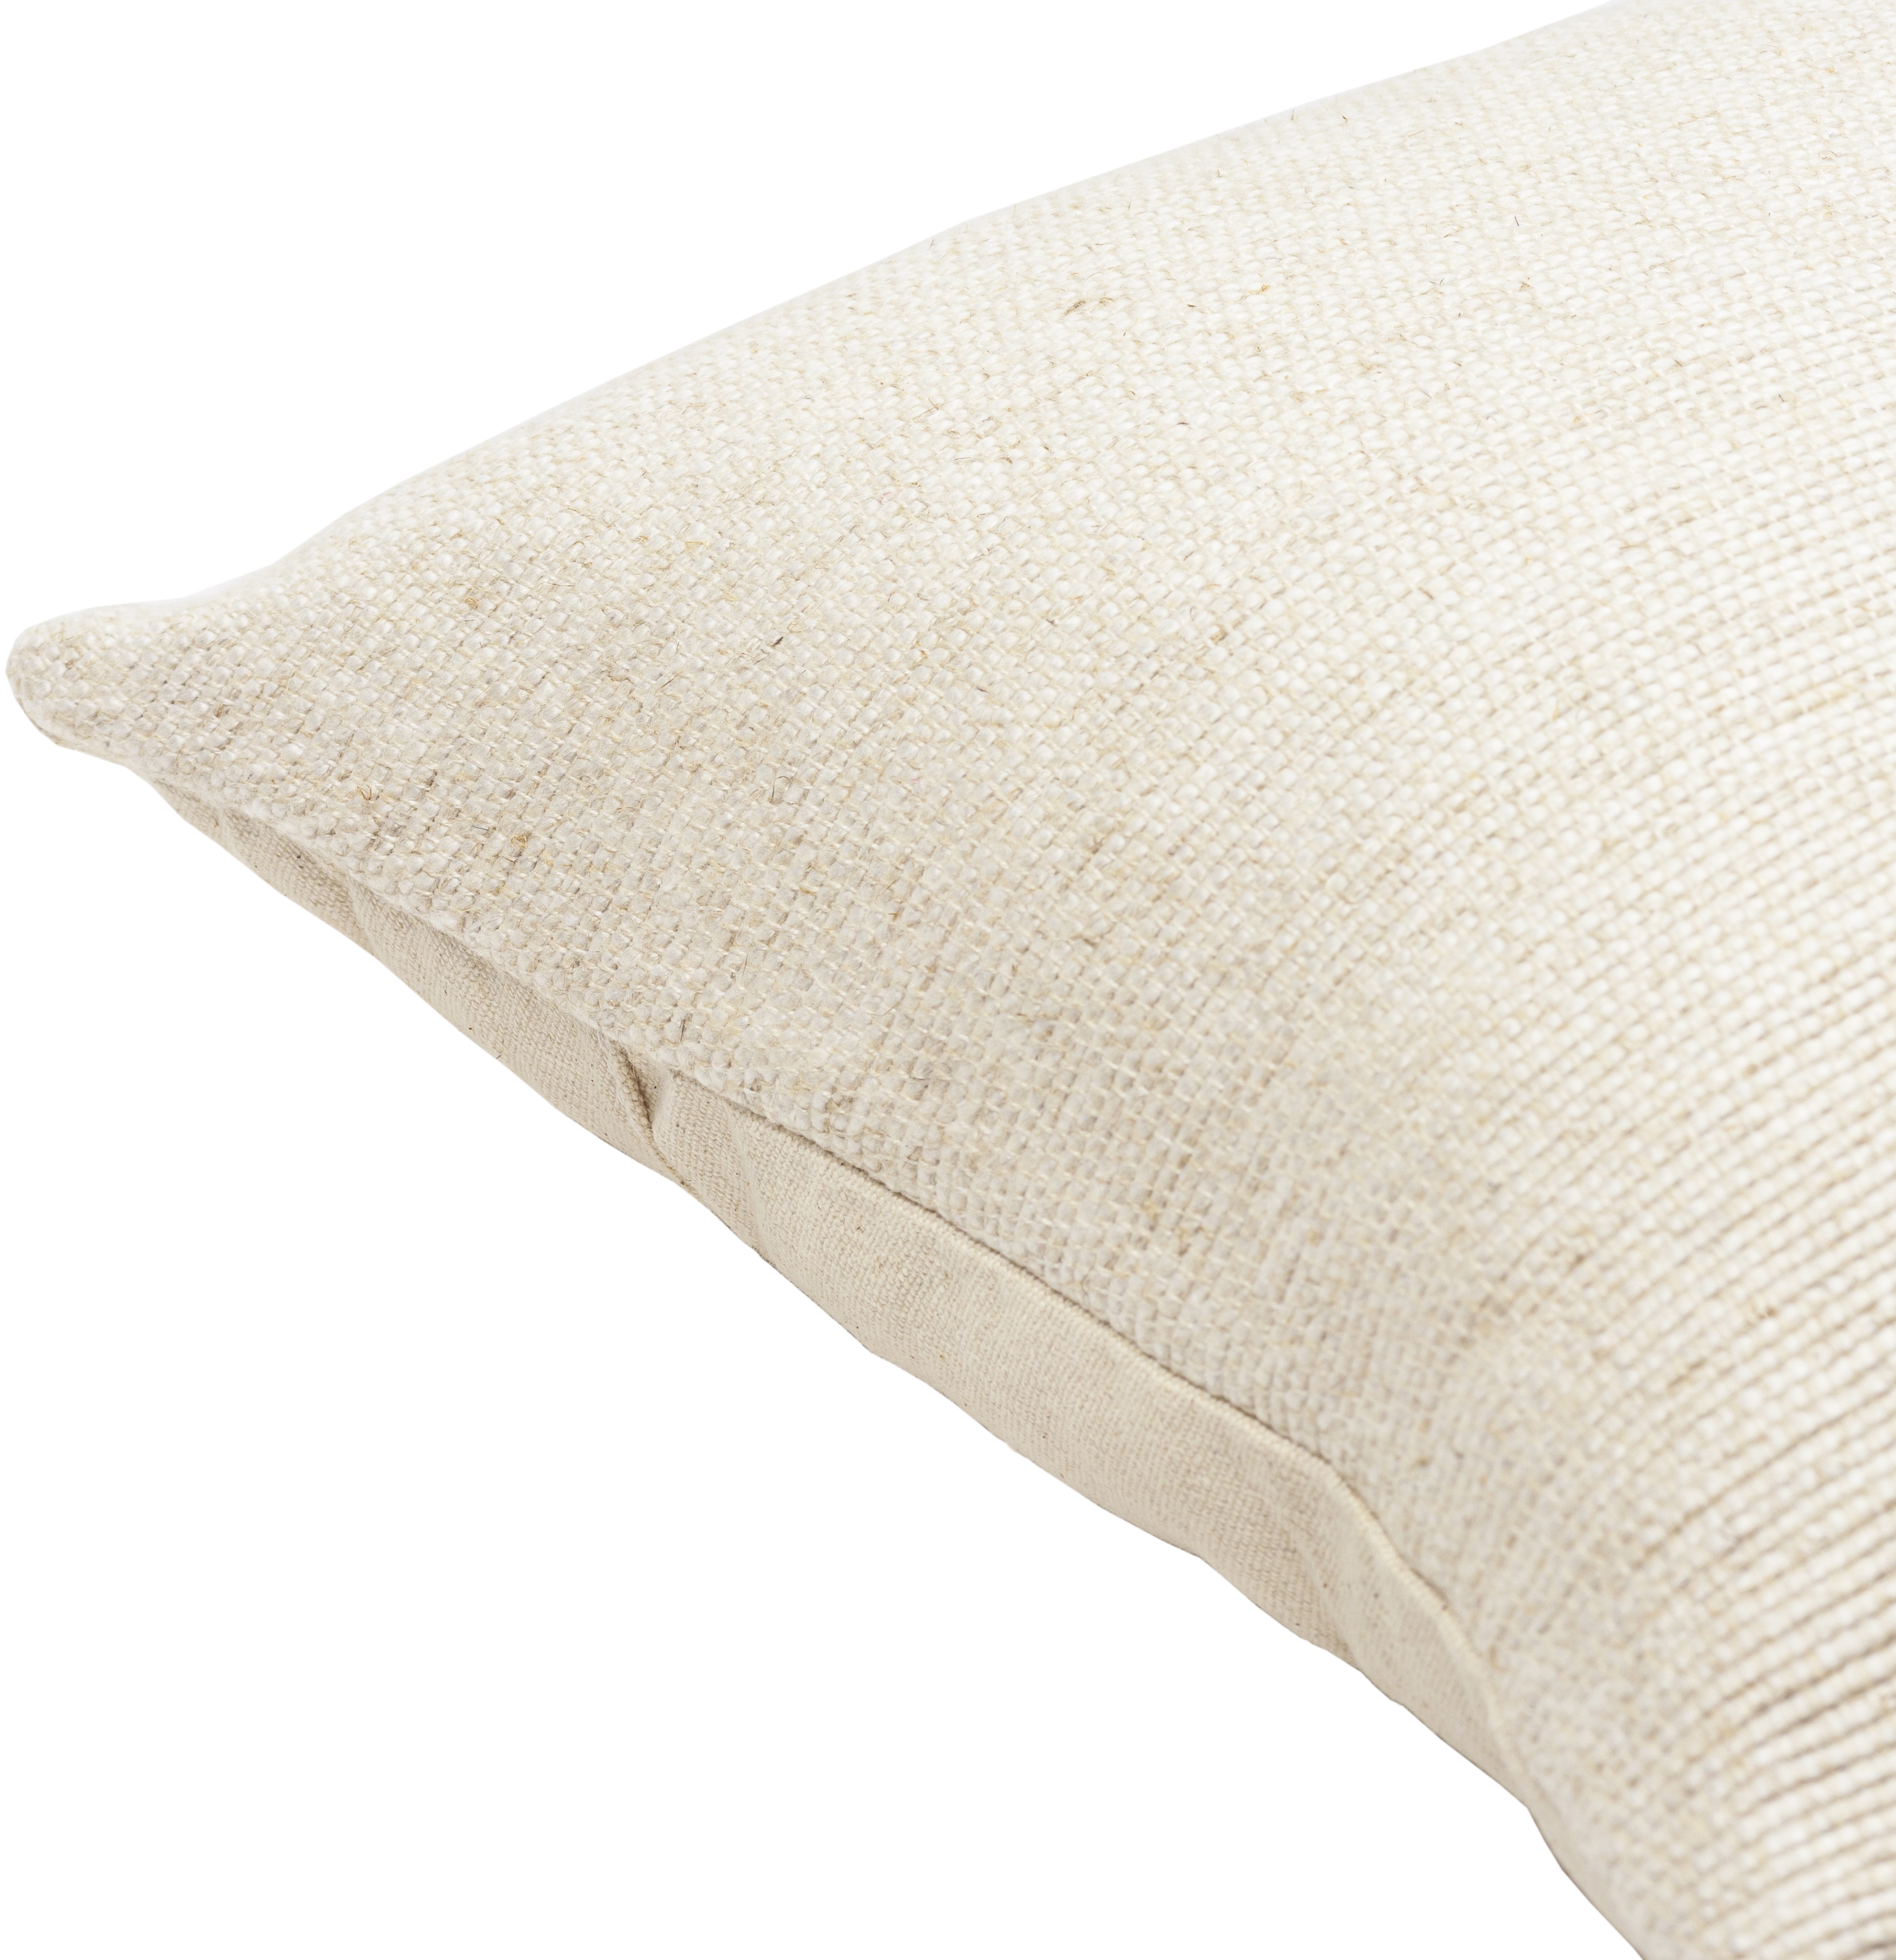 Sallie Throw Pillow, 20" x 20", with down insert - Image 2